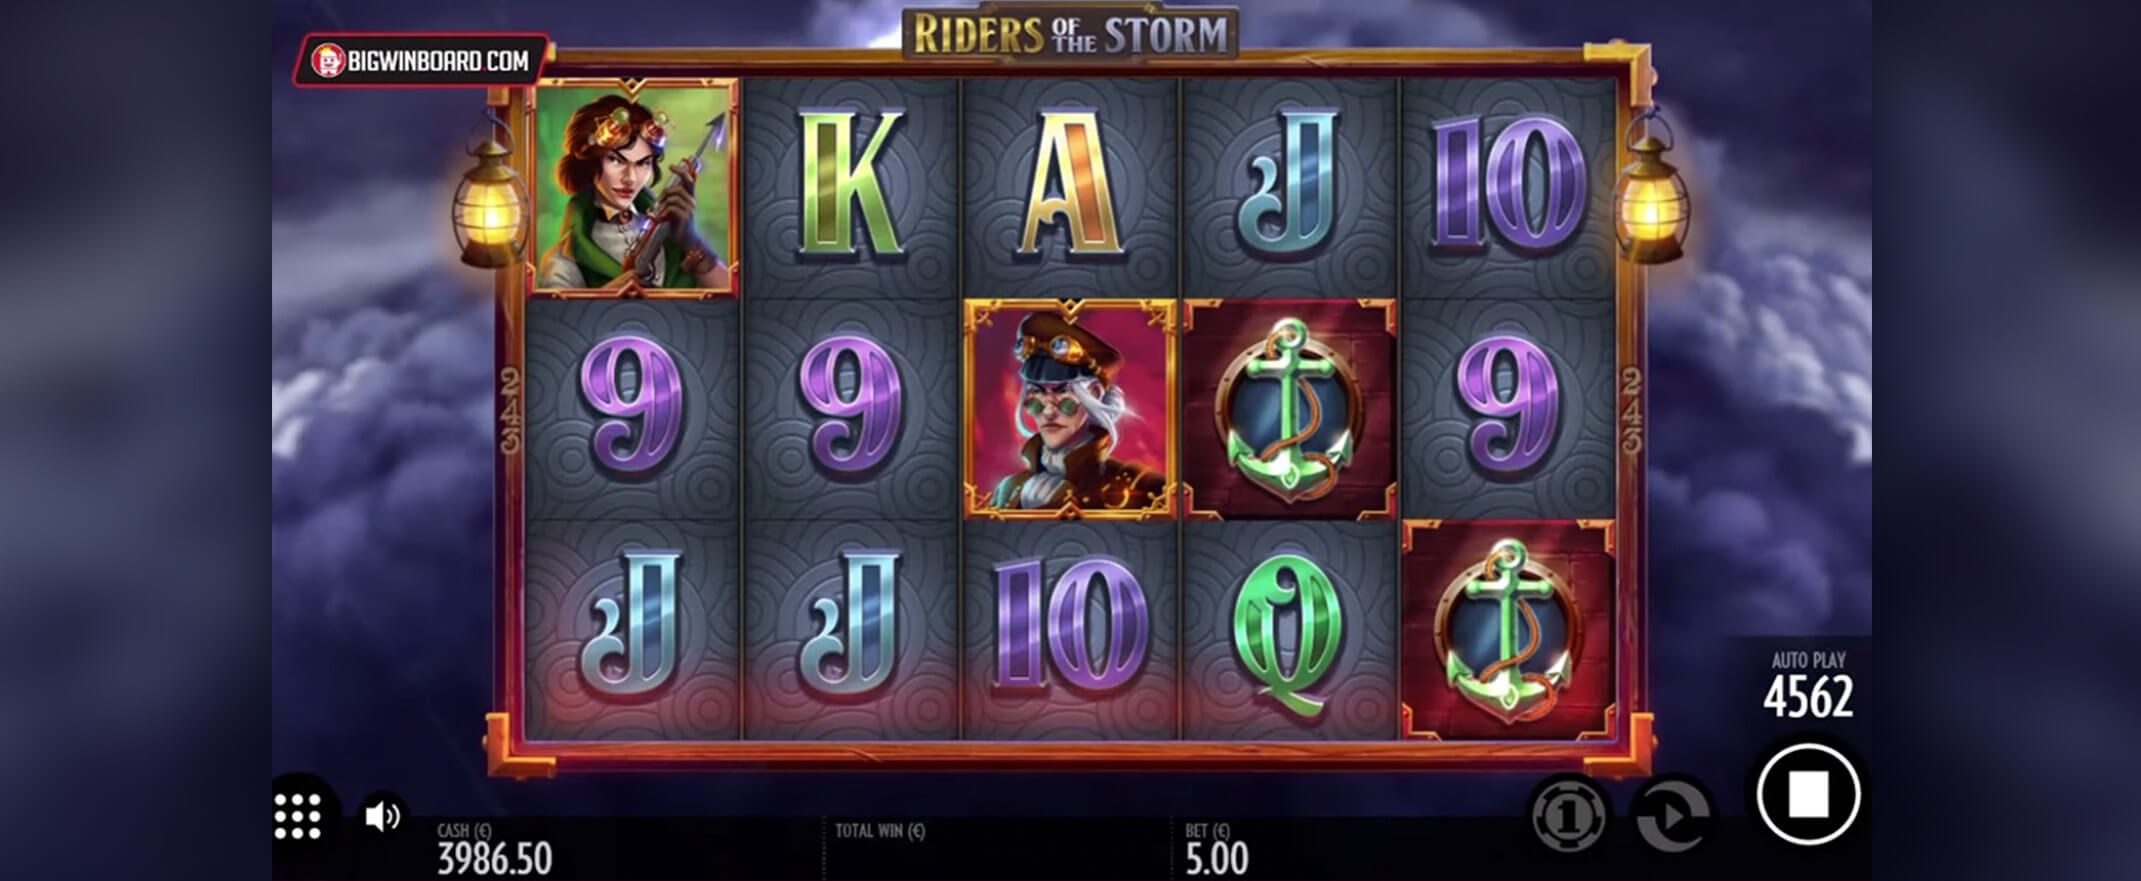 Riders of the storm slot